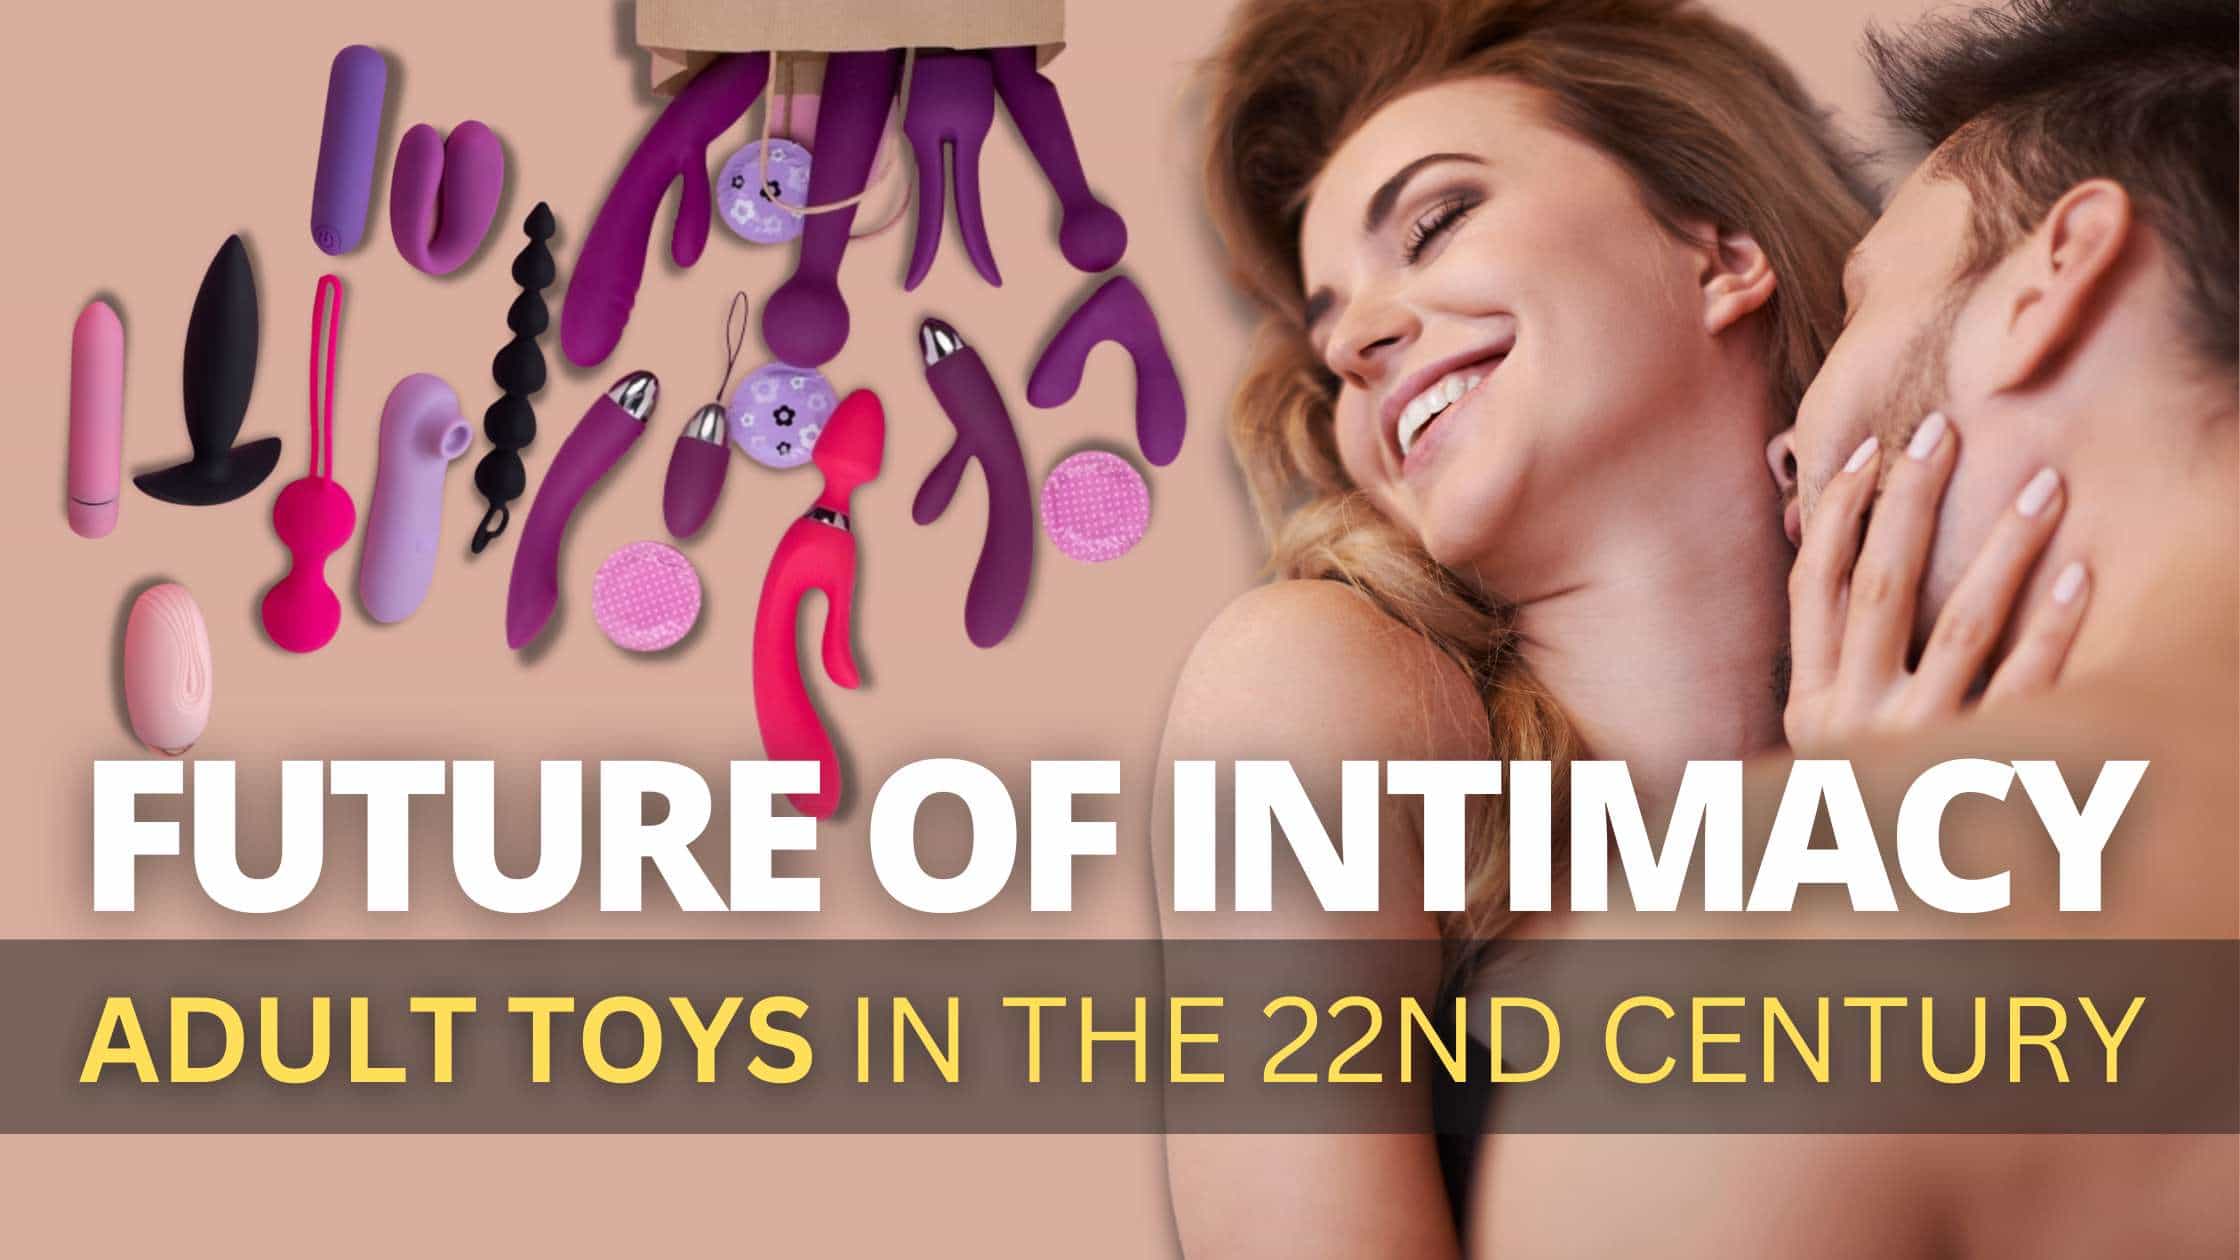 Future of Intimacy Adult Toys in the 22nd Century